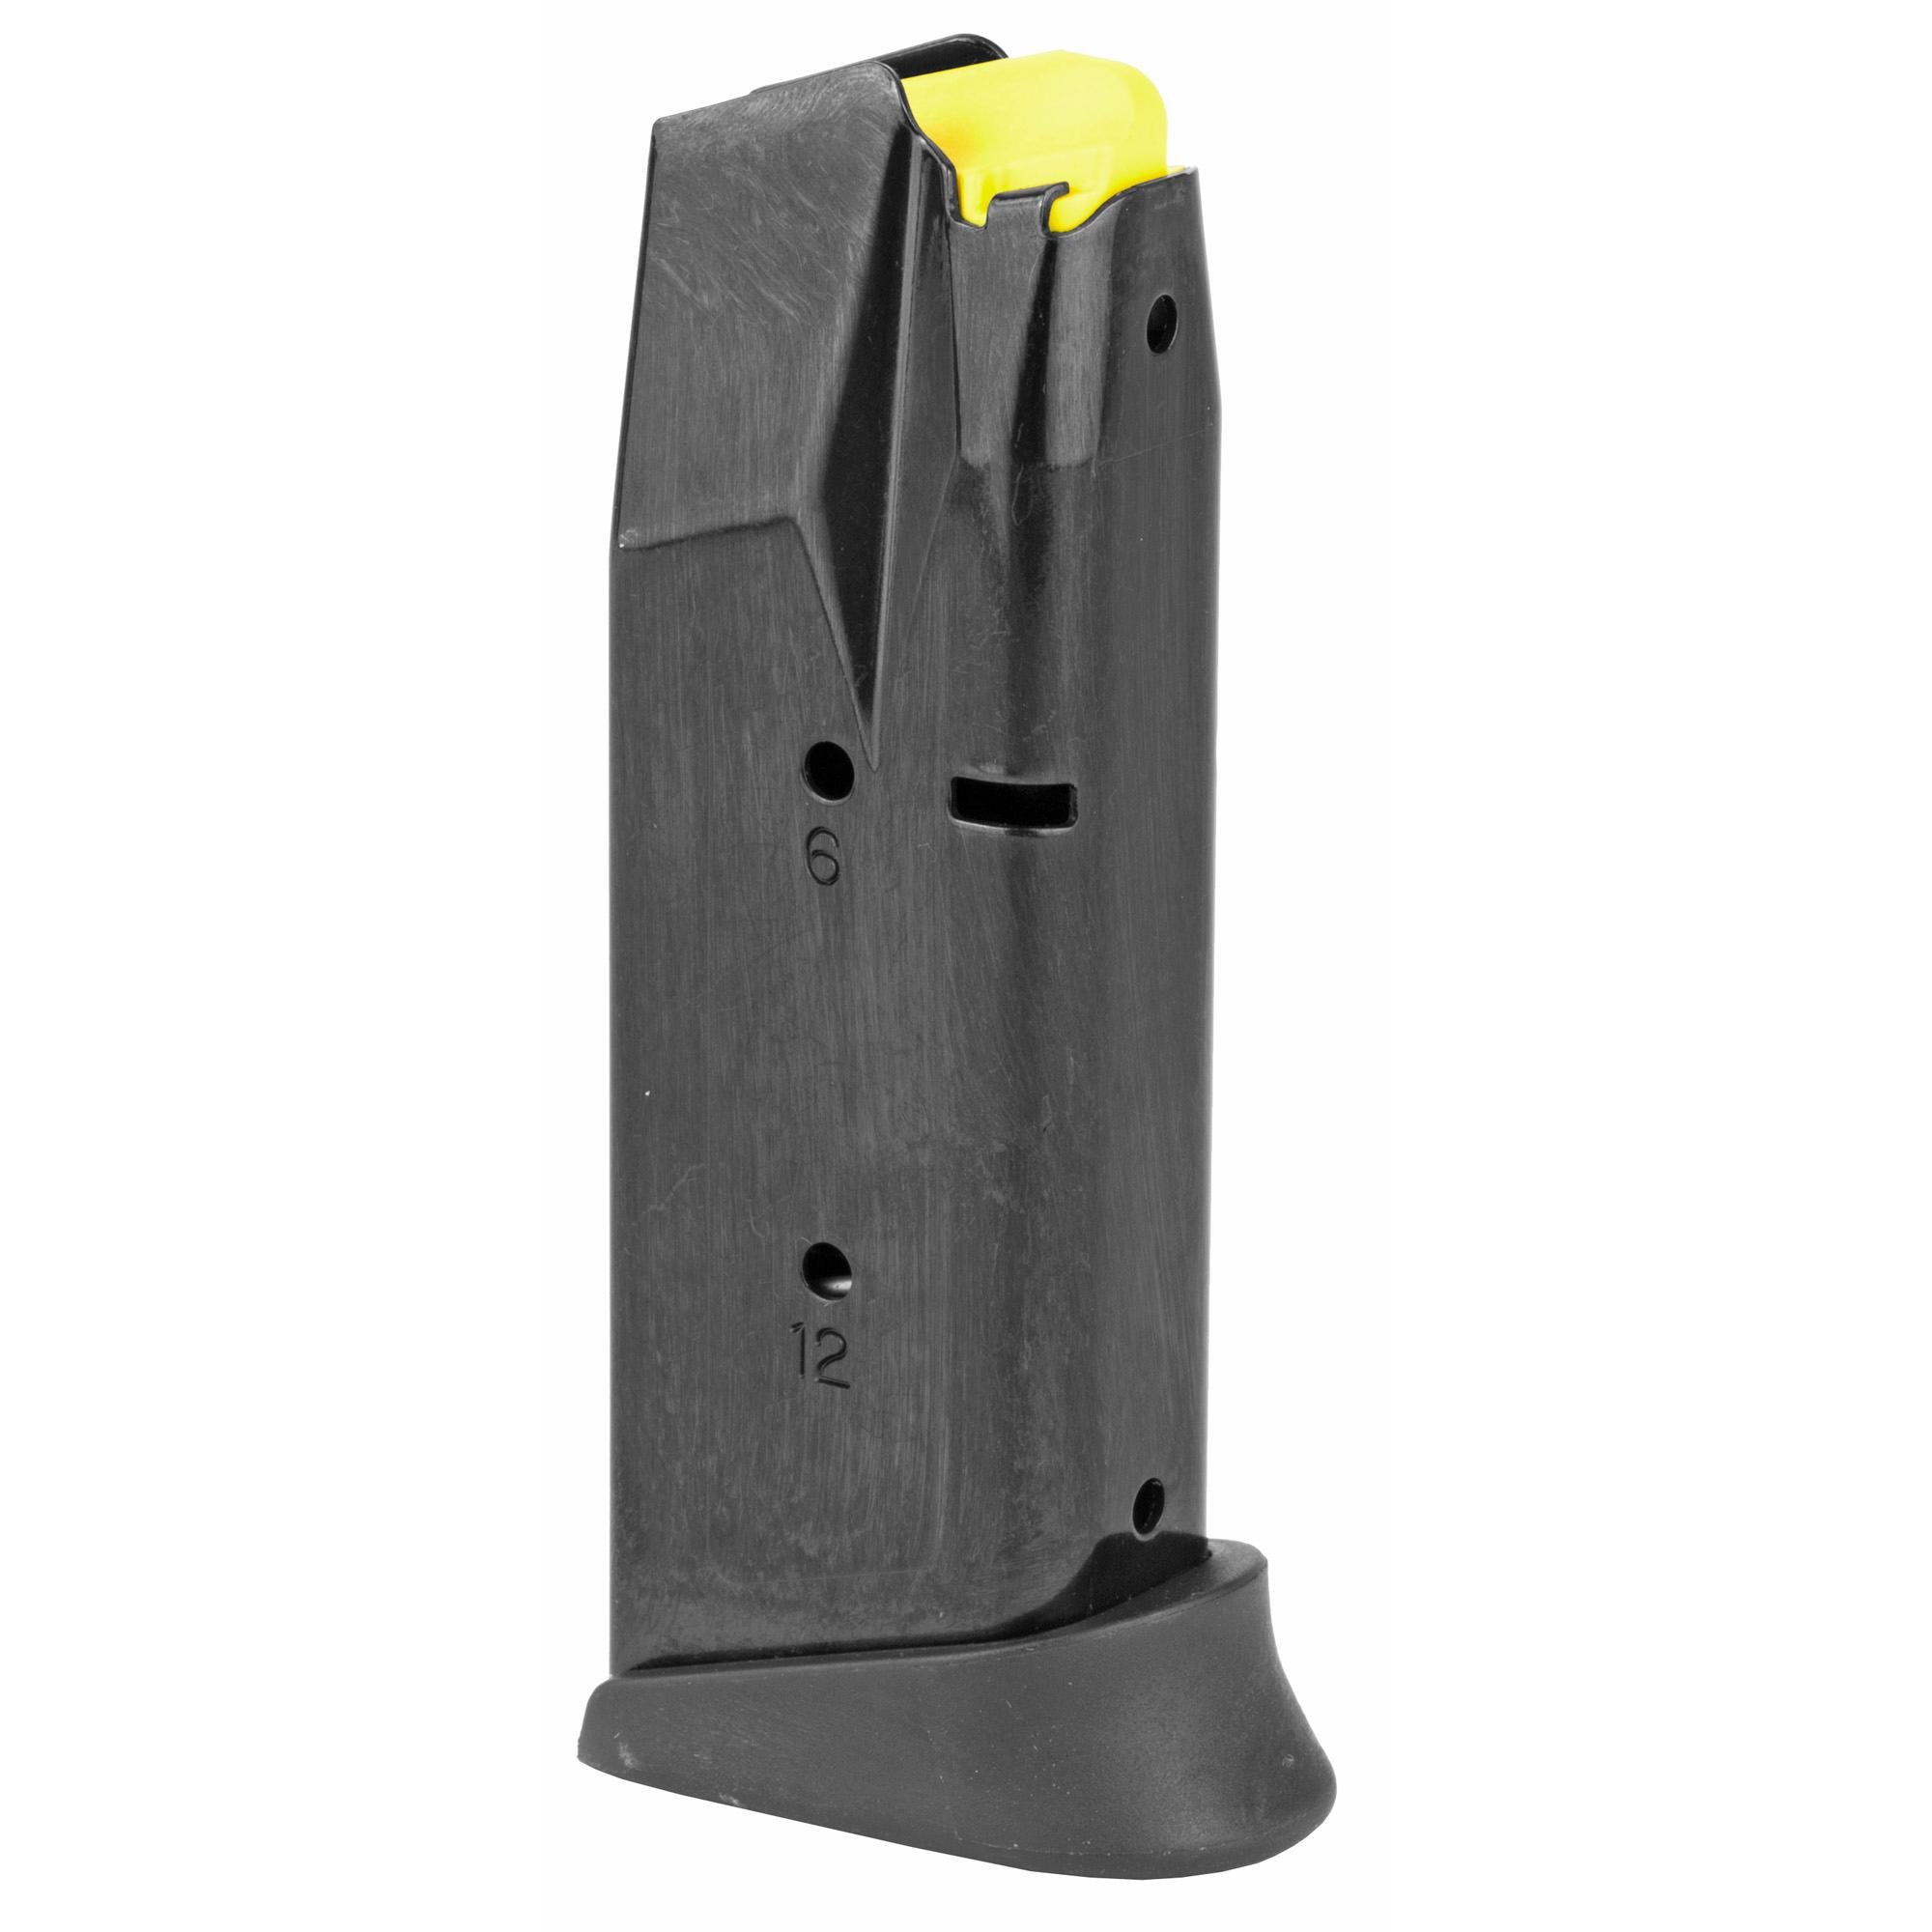 G2c 9mm Mag 12rd